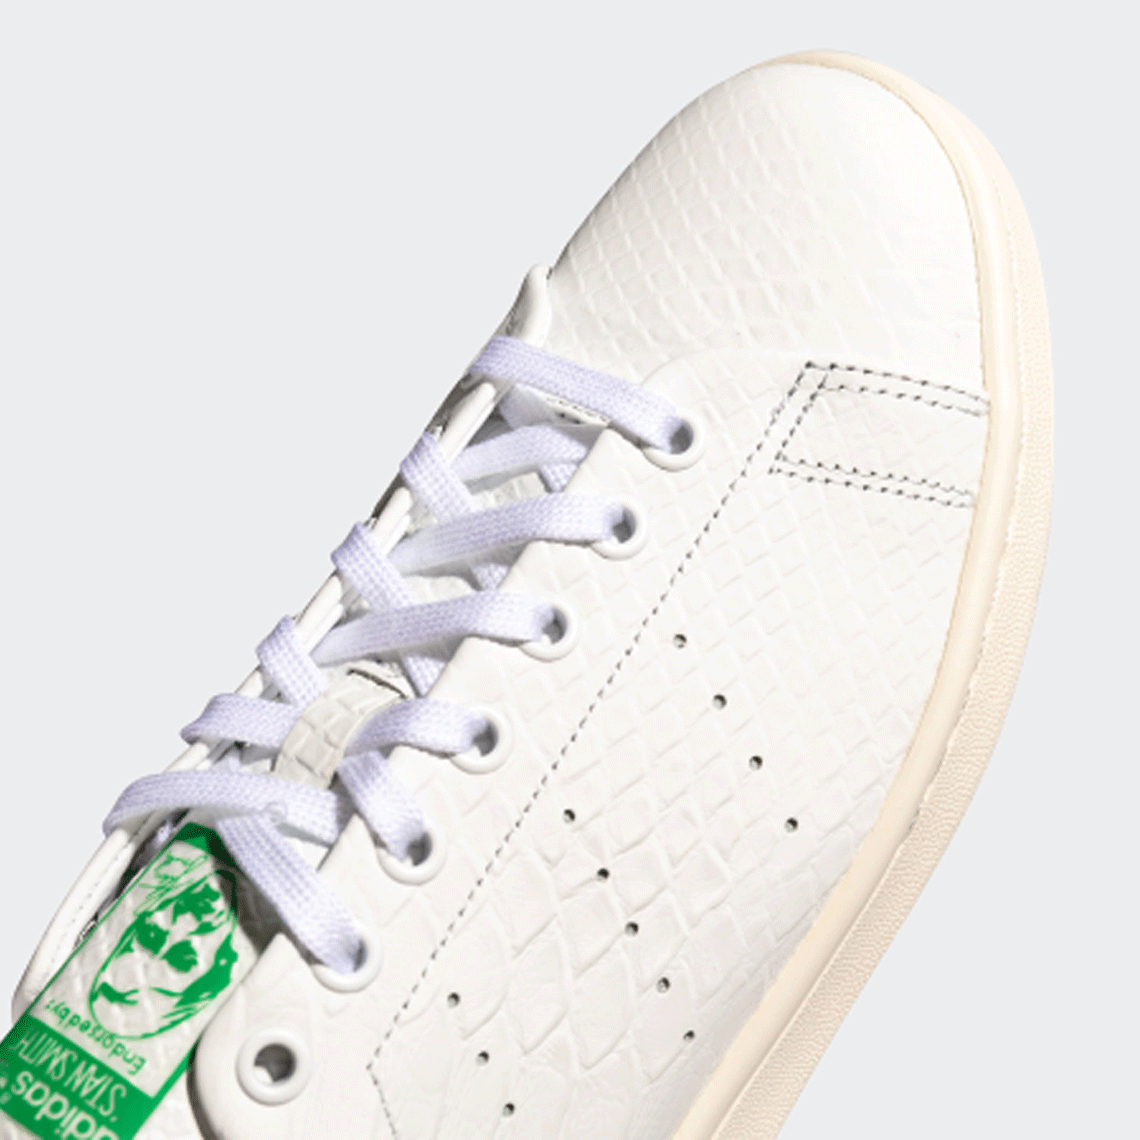 stan smith croco homme 2017, 60%,